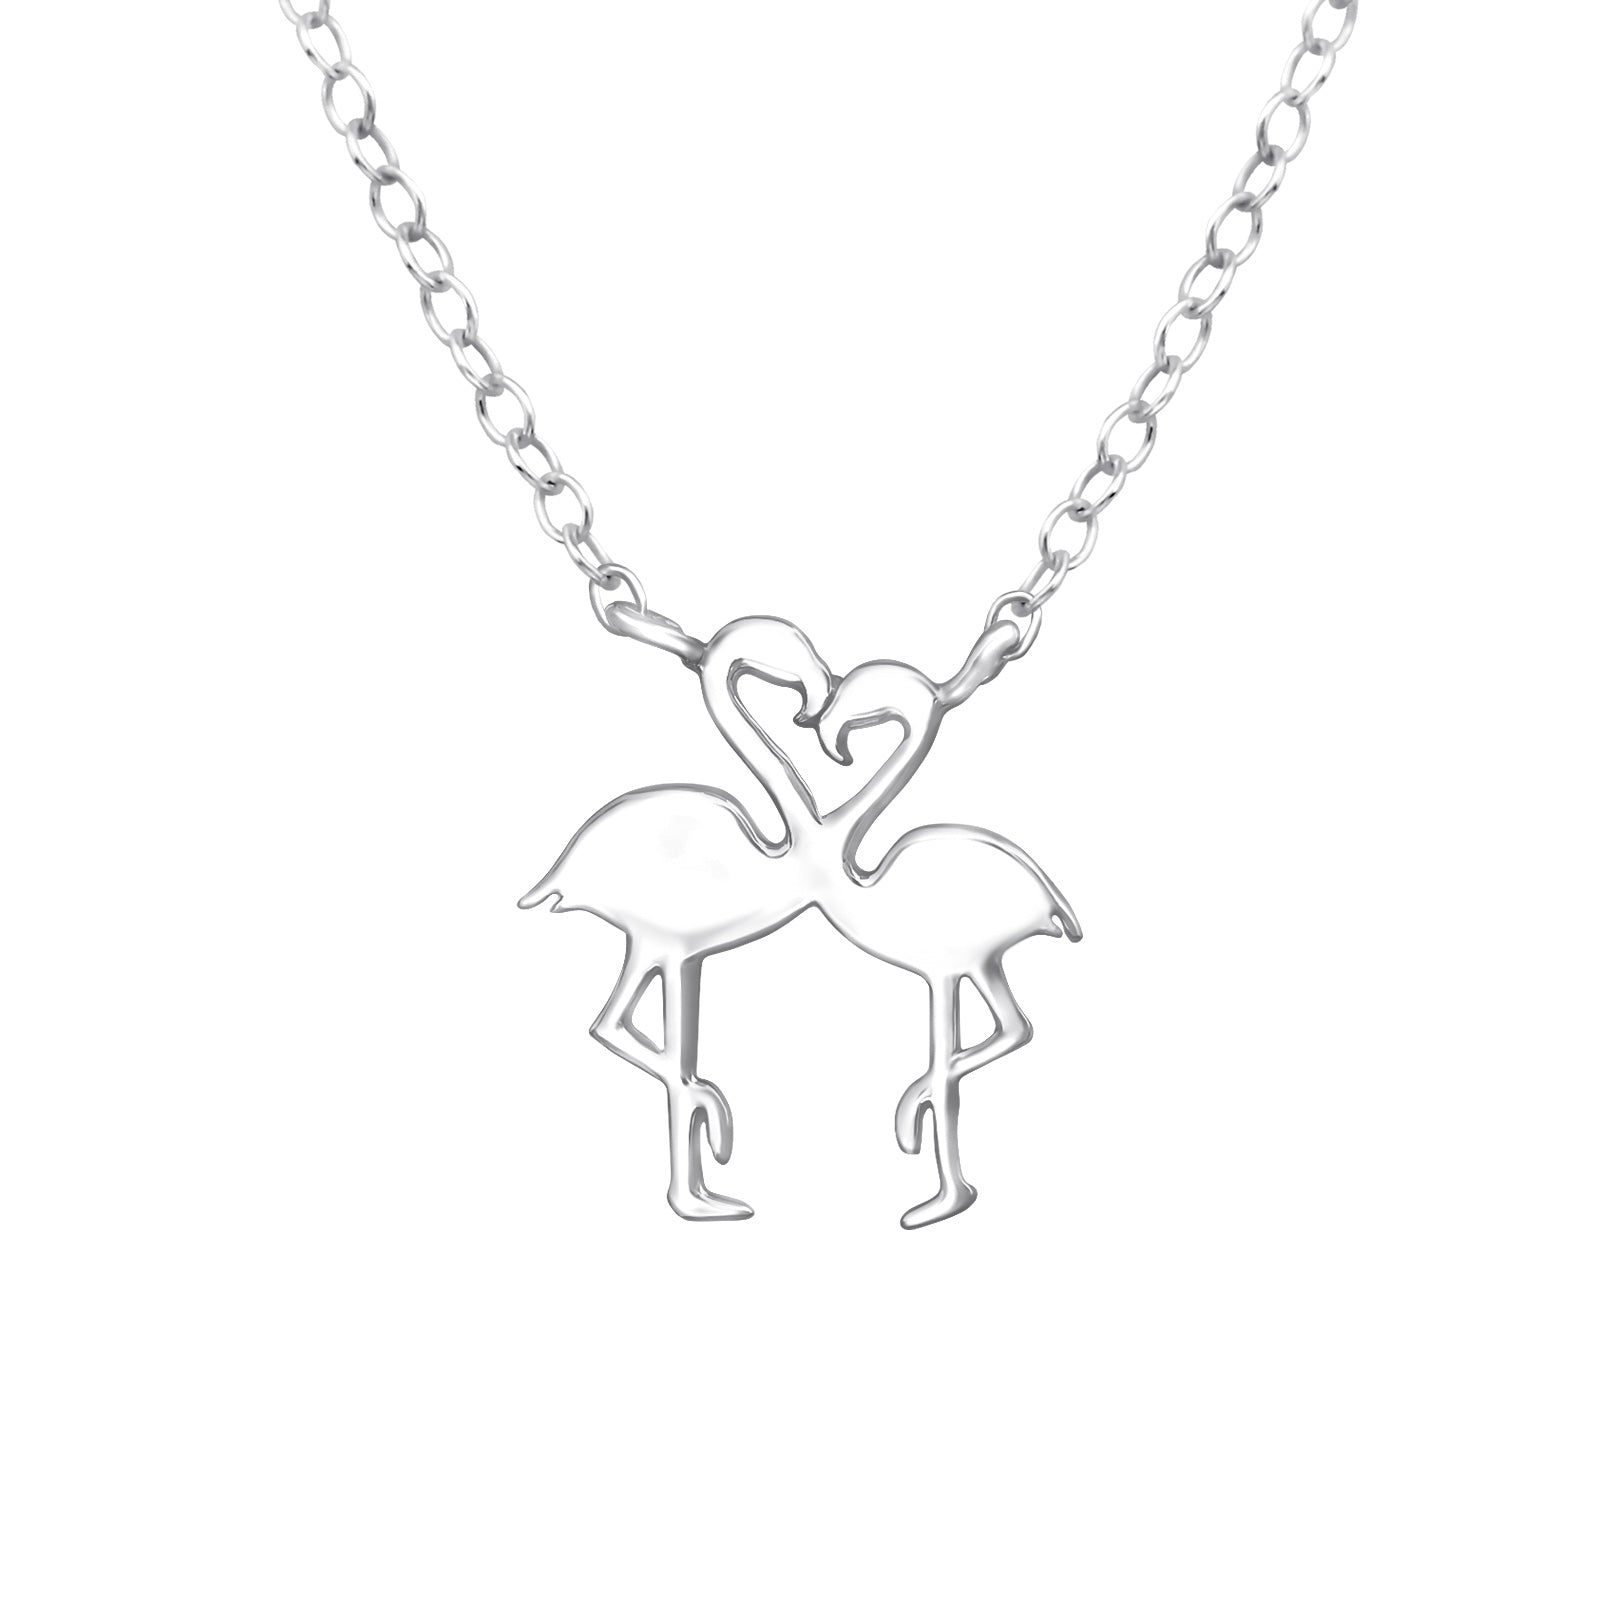 Gorgeous necklace with two flamingoes in the shape of a heart.